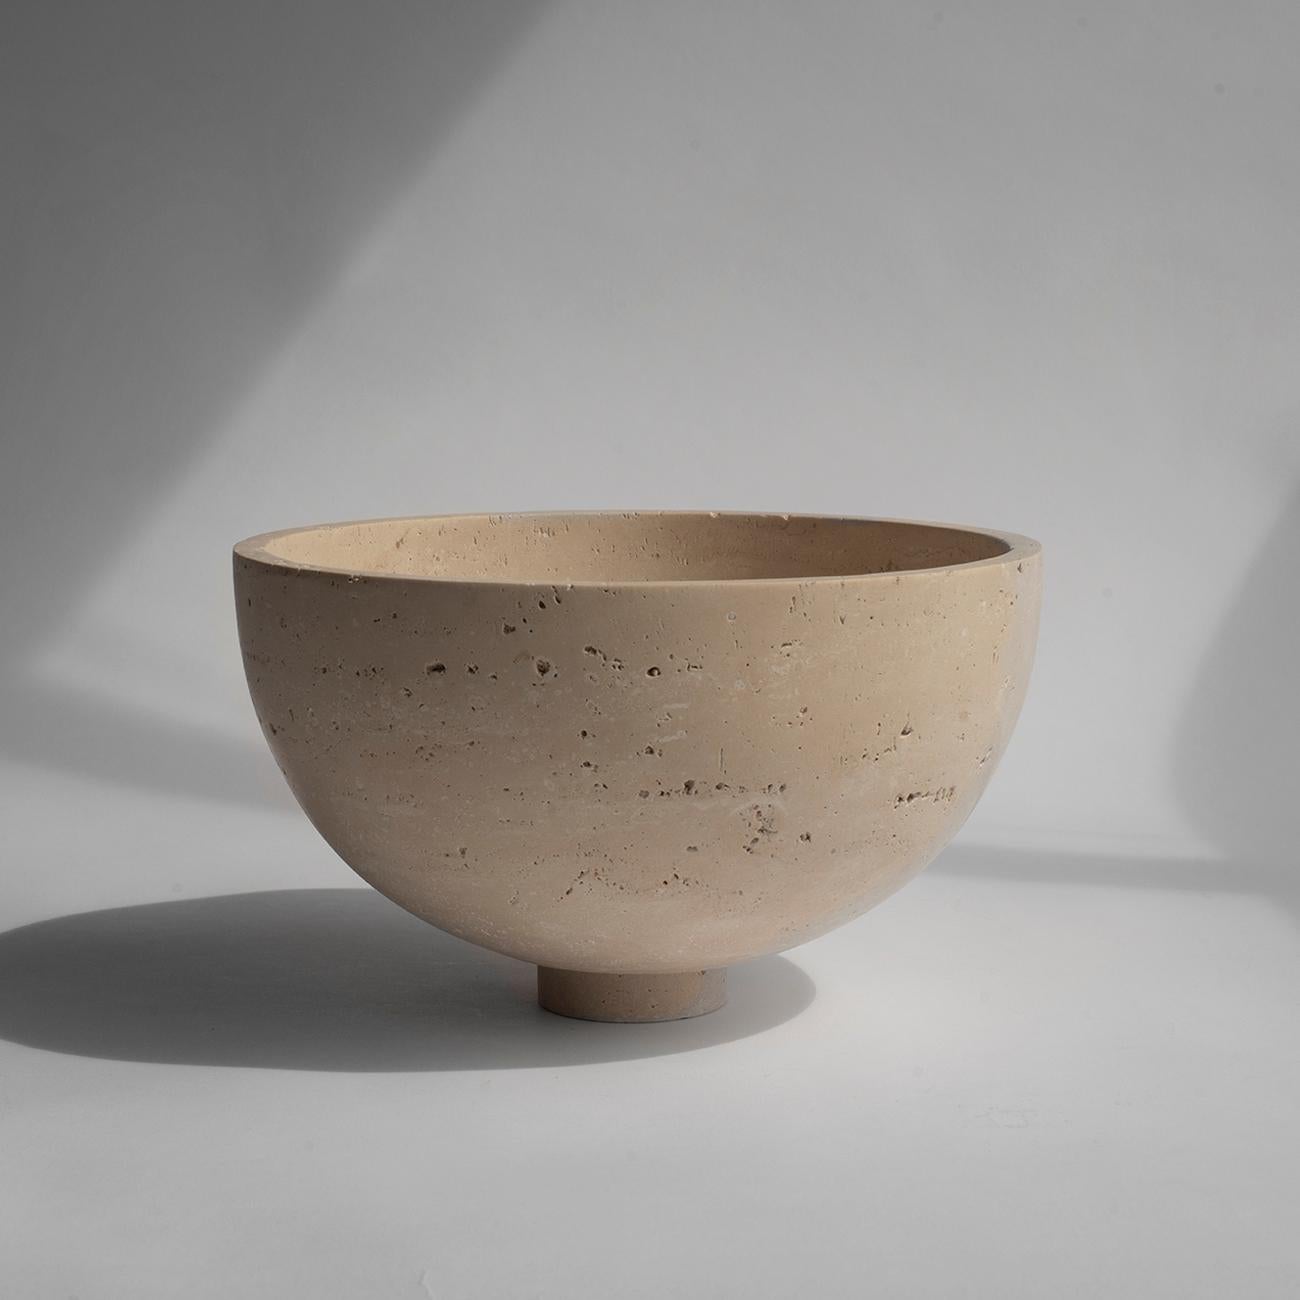 A substantial travertine bowl crafted from a natural travertine stone rests atop a mini pedestal for a grand presentation of fruits. It is truly an eyecatcher in your dining room. 

There may be natural variations that are not product flaws, they